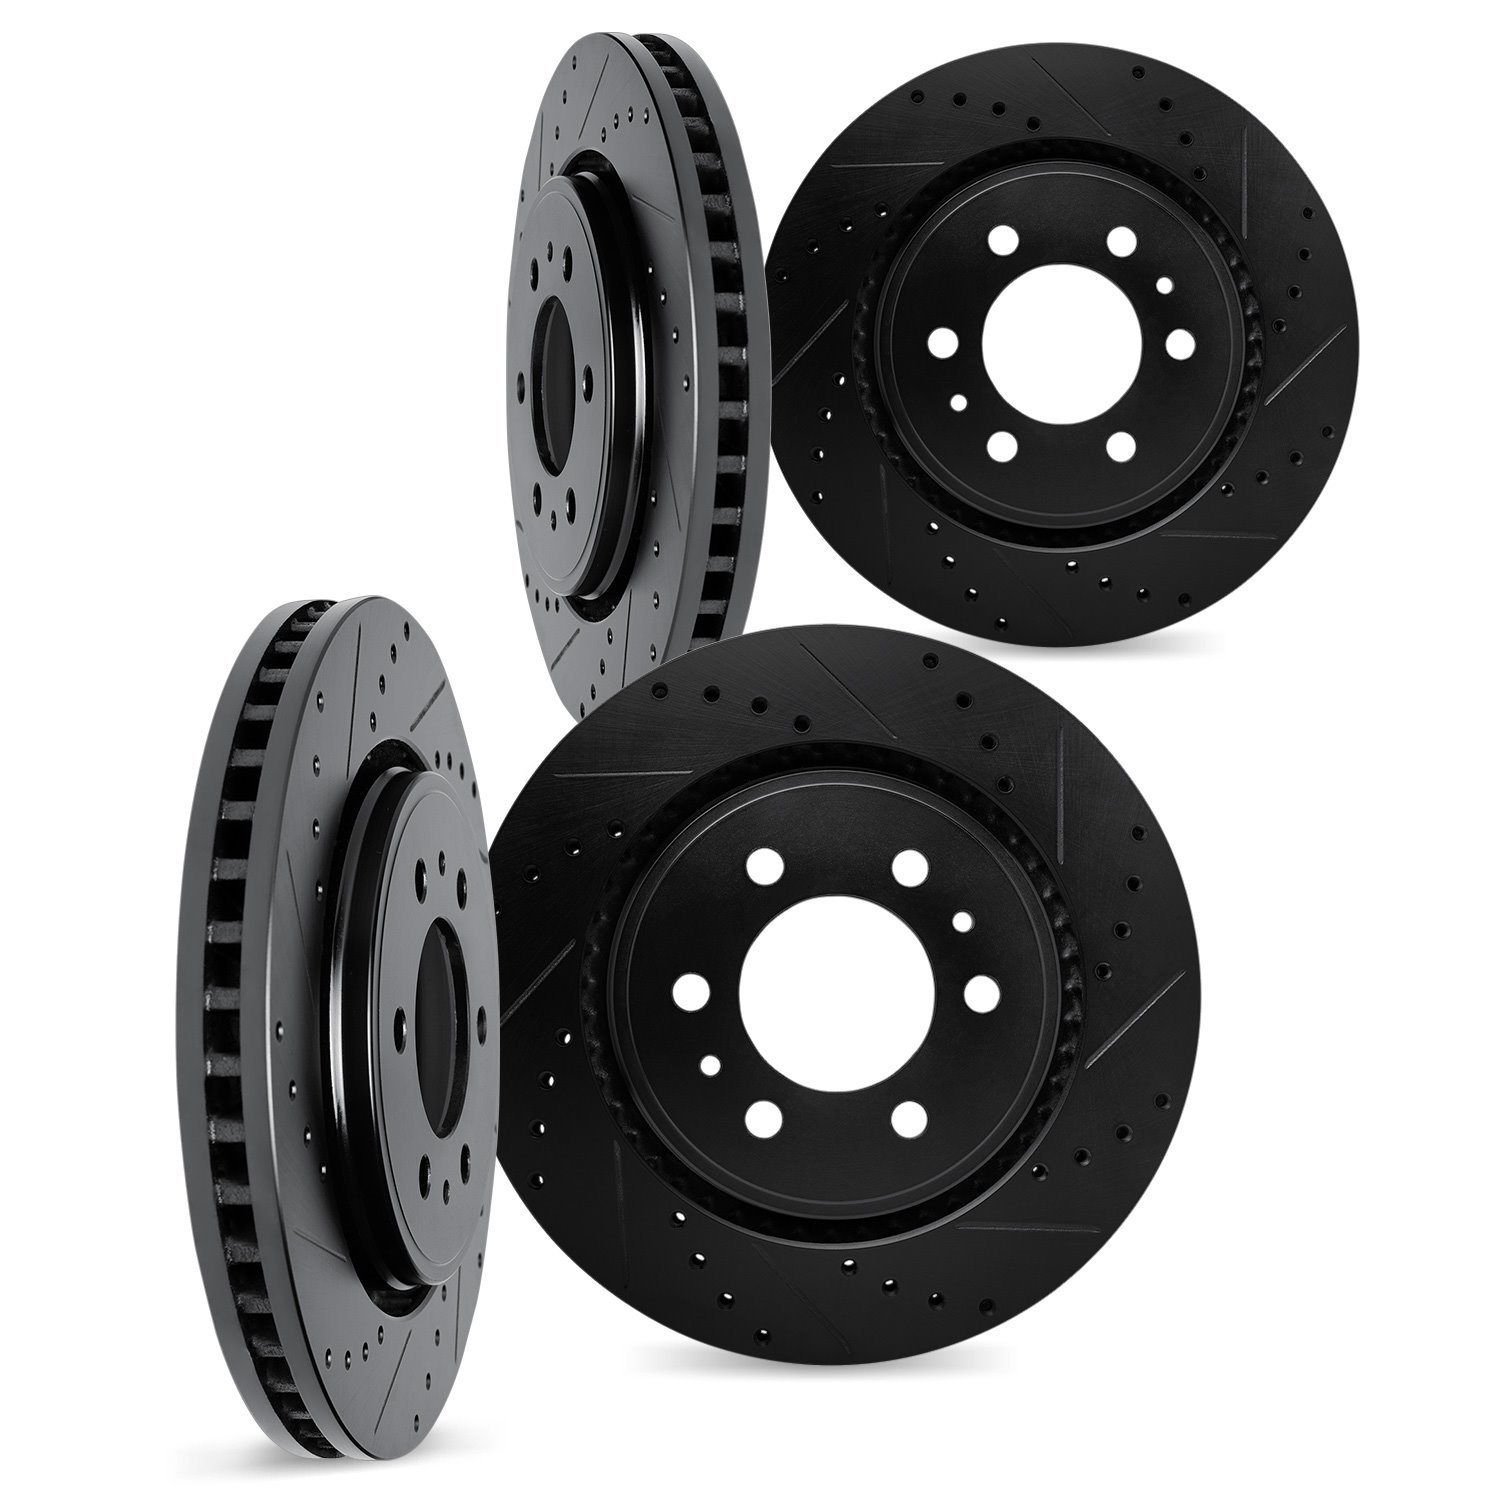 8004-76016 Drilled/Slotted Brake Rotors [Black], 1993-1997 Lexus/Toyota/Scion, Position: Front and Rear